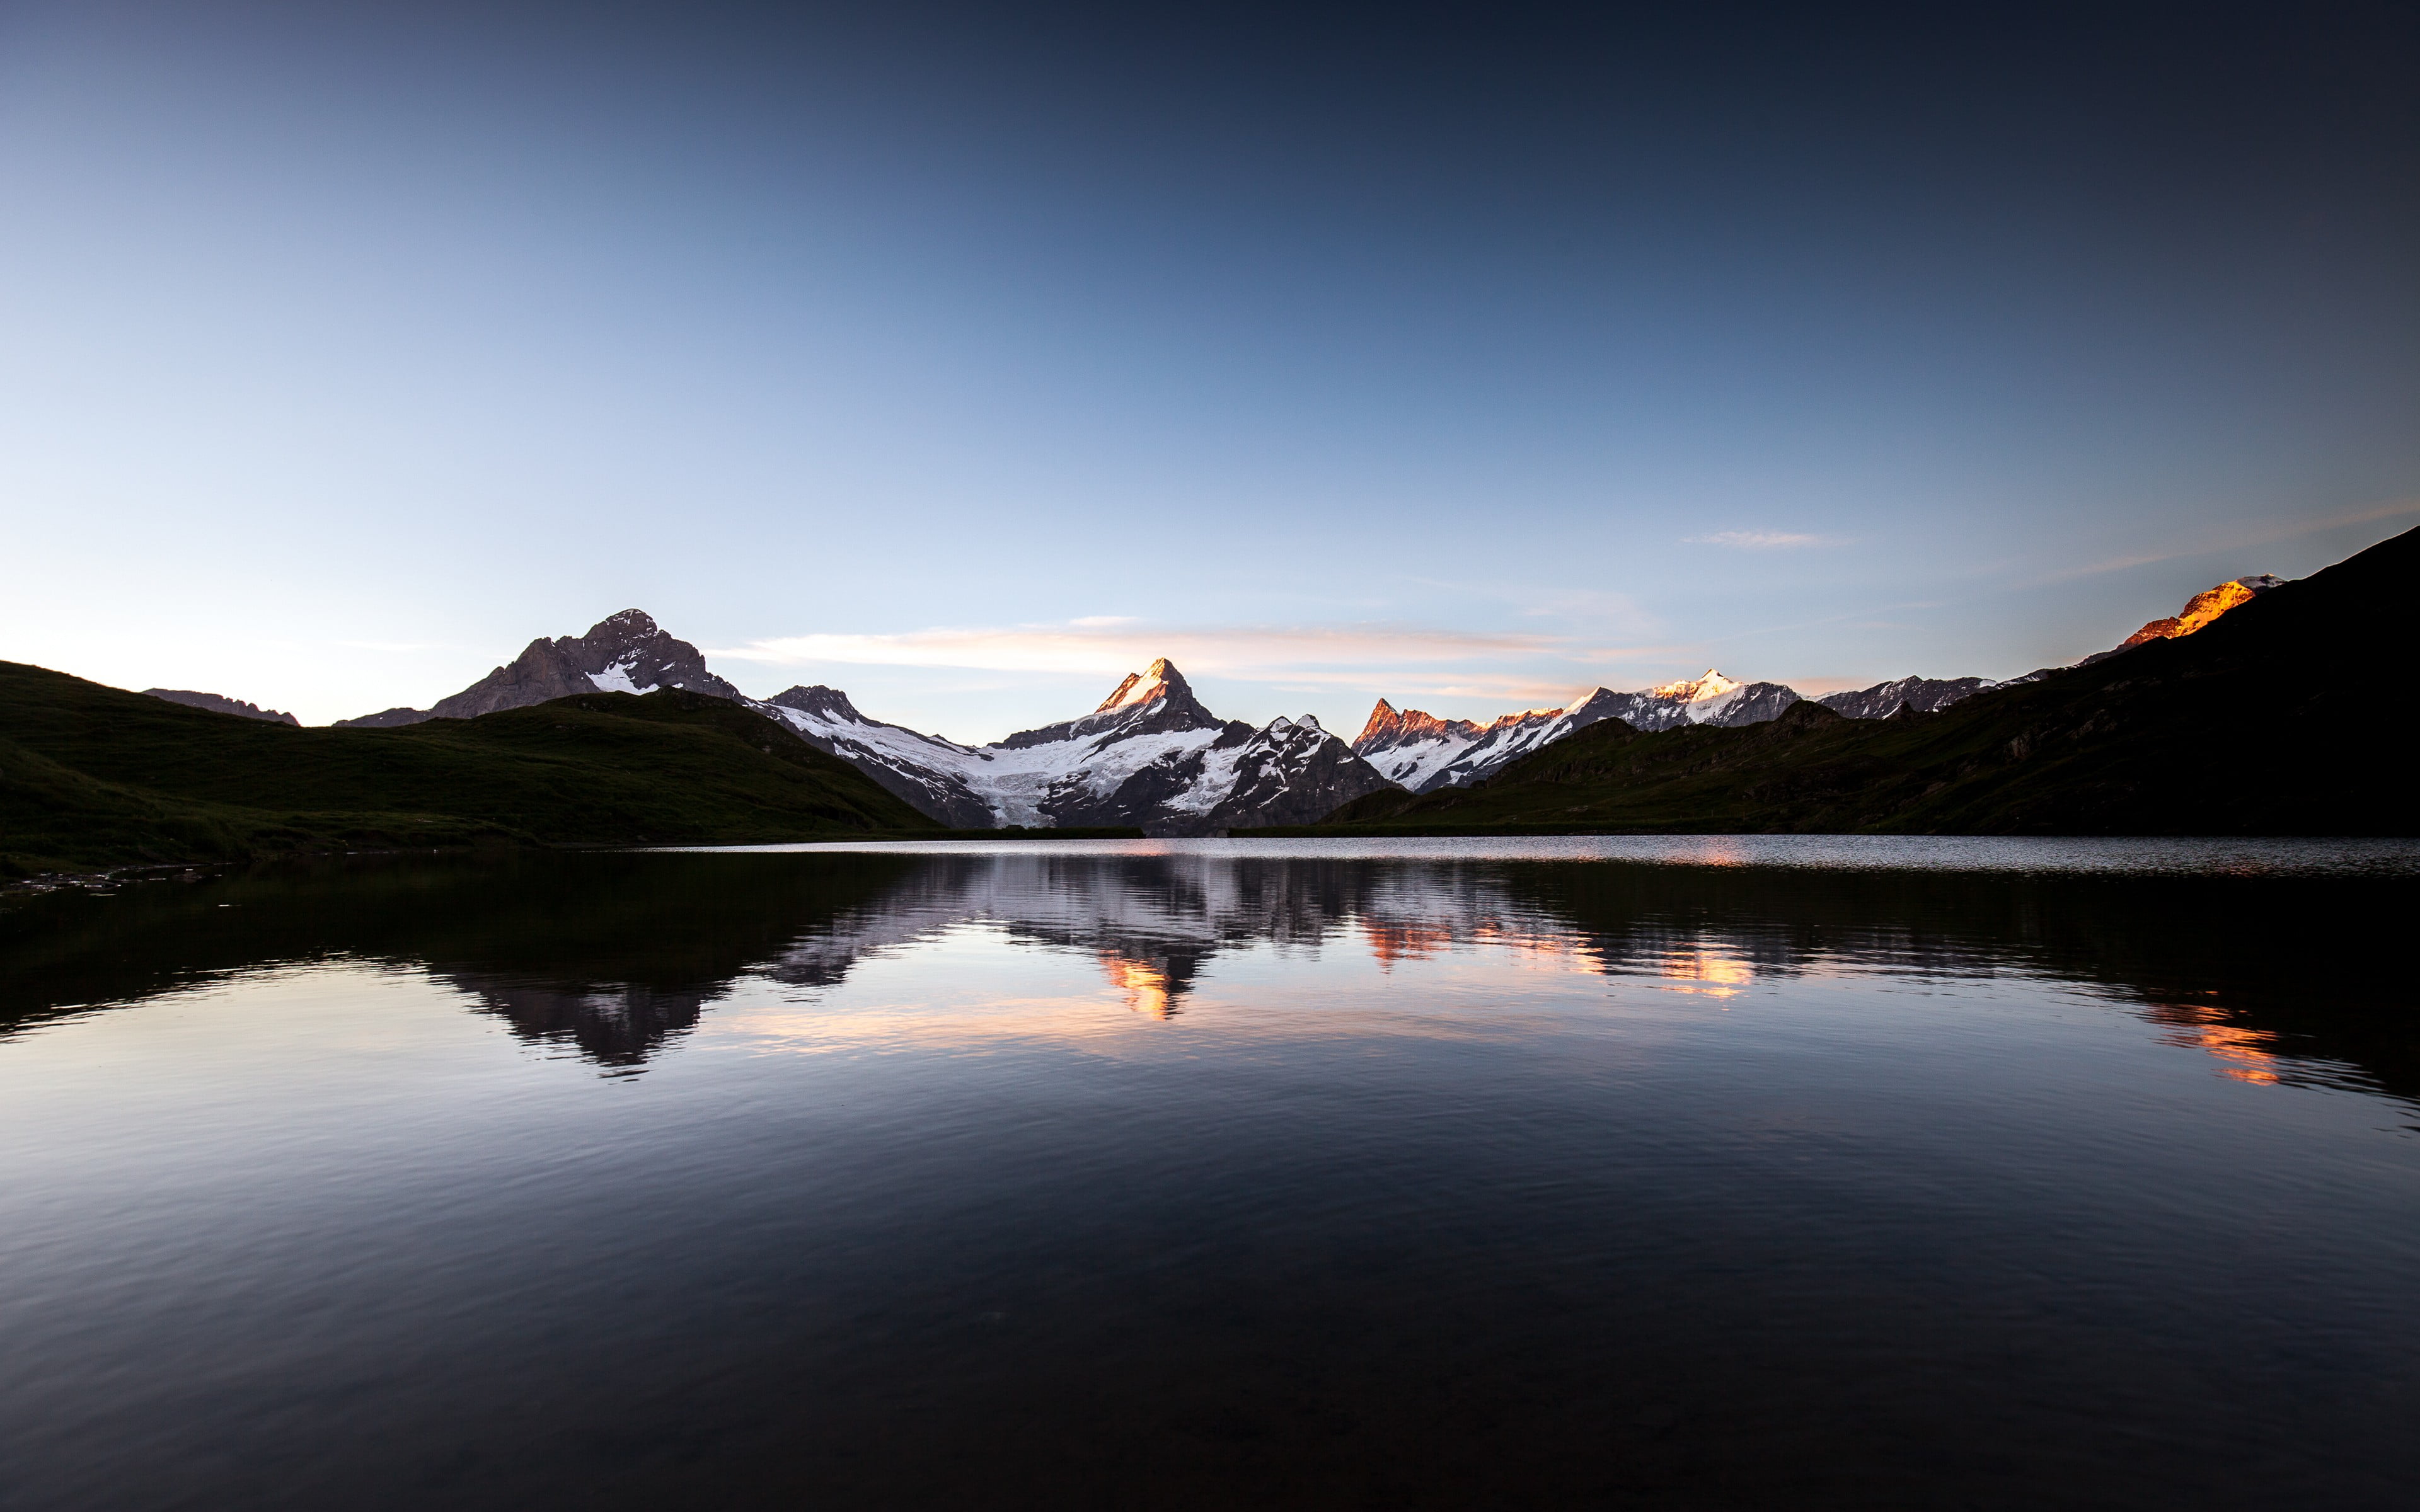 snow-capped mountain, landscape, mountains, lake, sunset